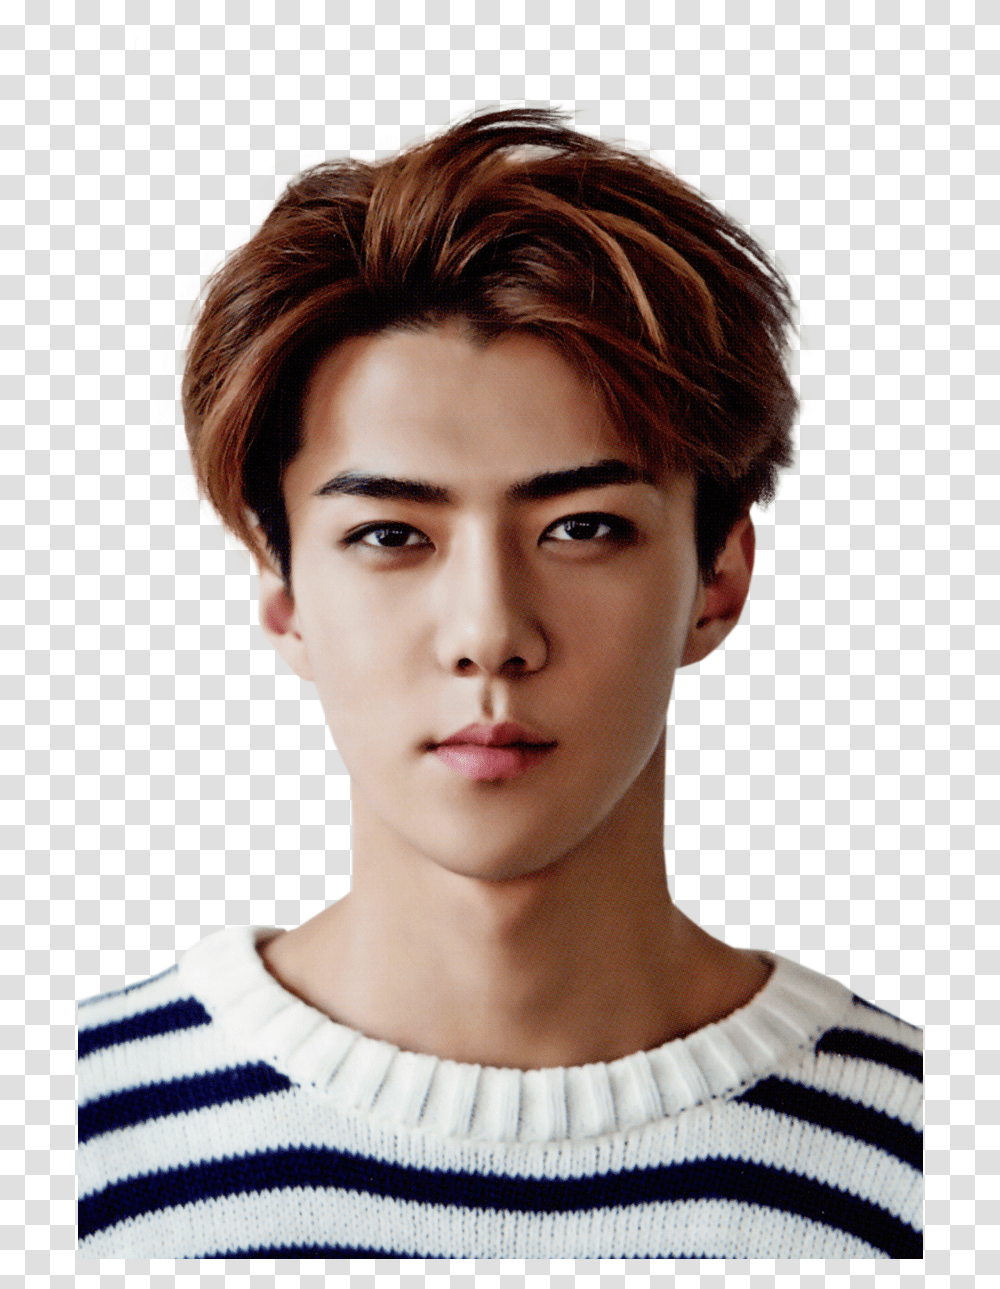 Exo Sehun And Kpop Image Exo Sehun Brown Hair, Face, Person, Head, Portrait Transparent Png